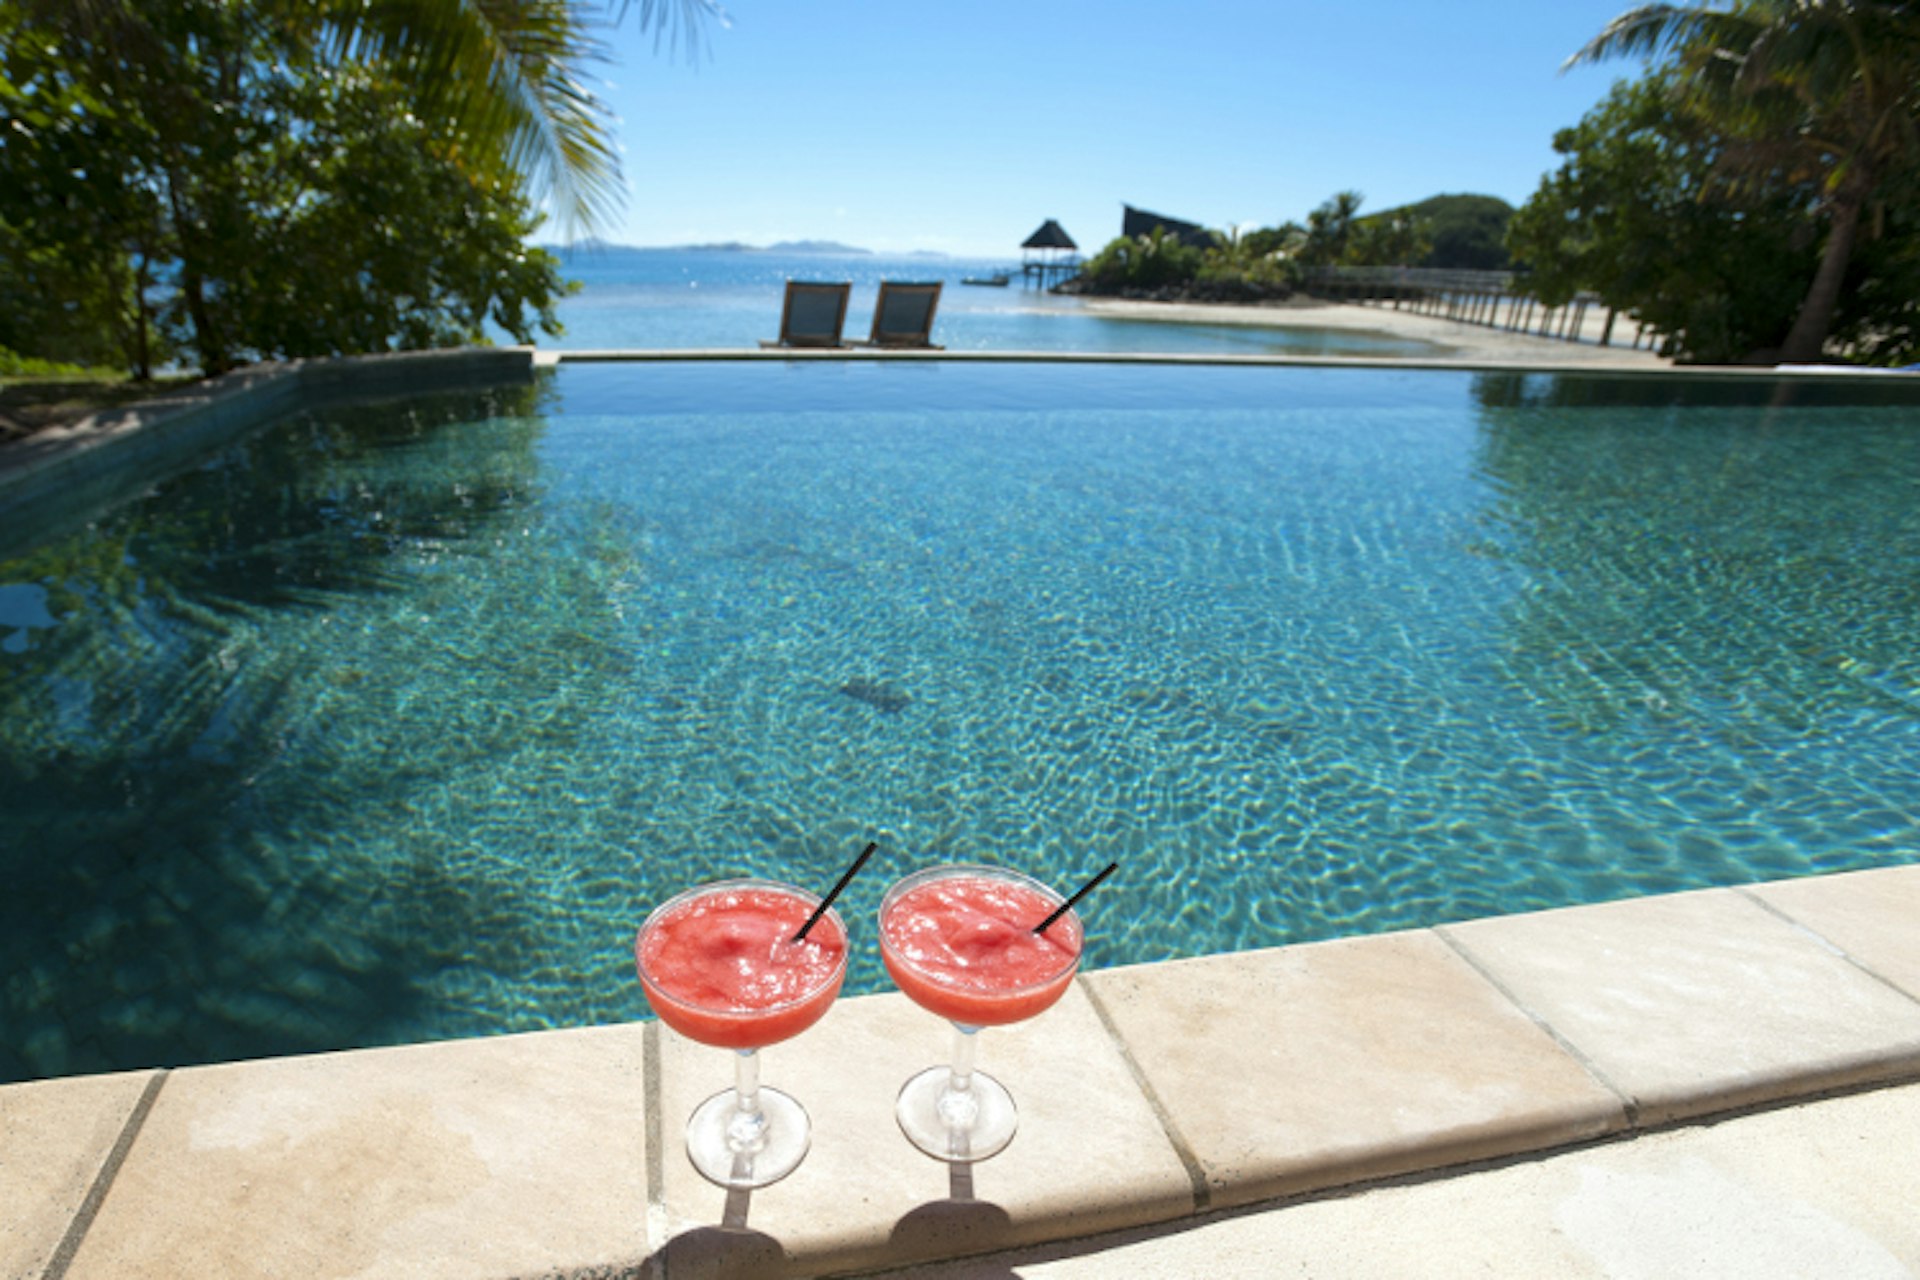 Poolside cocktails for two. Image by Courtney Keating / Getty Images